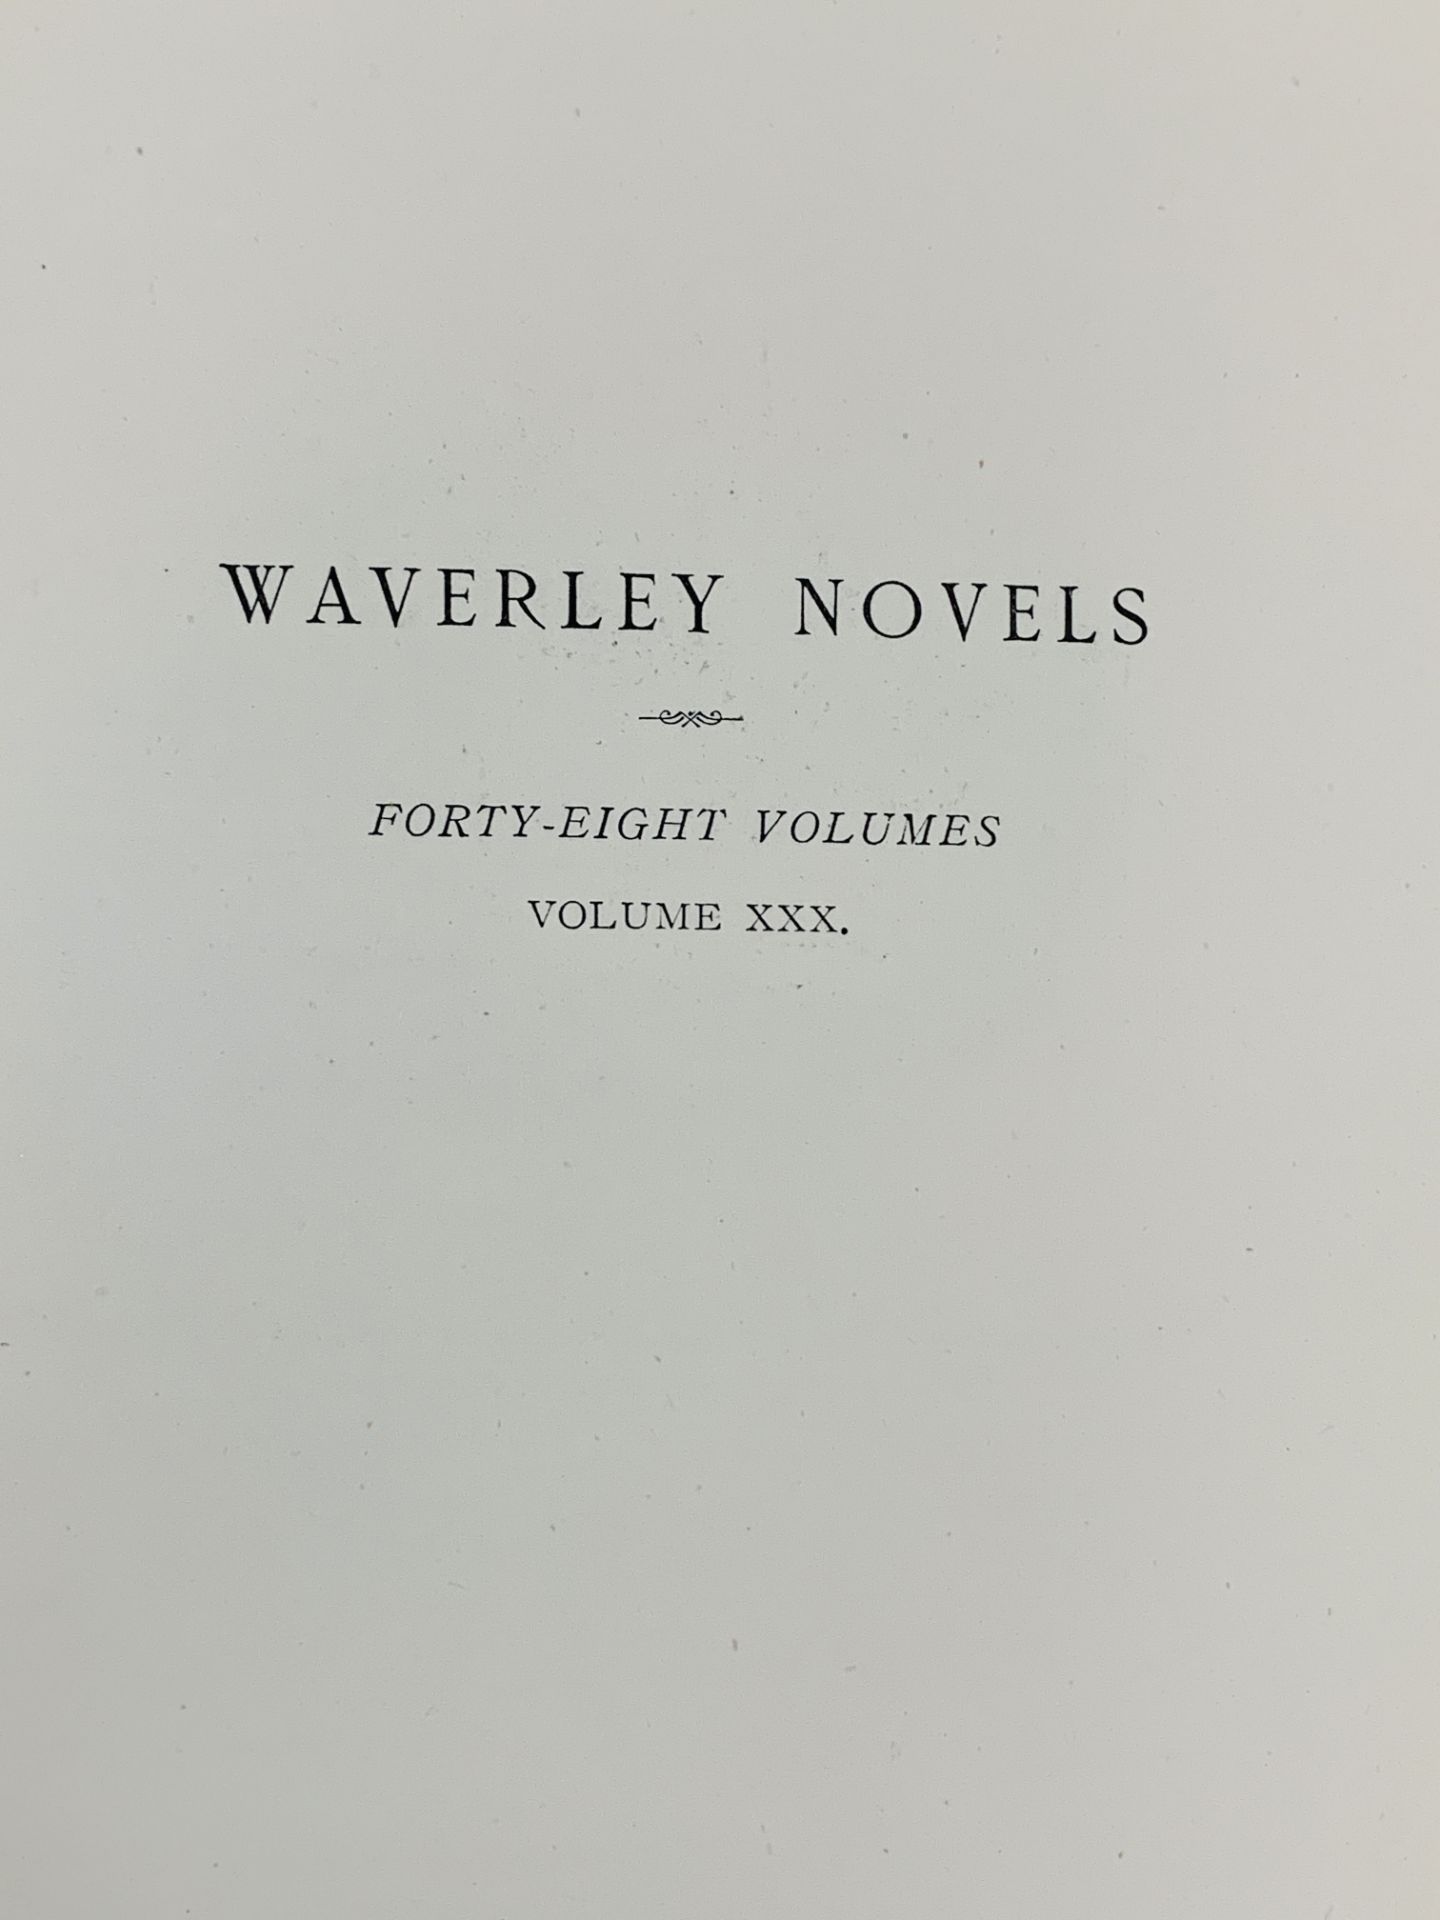 28 volumes of the Waverley Novels by Walter Scott, 1893 - Image 2 of 4